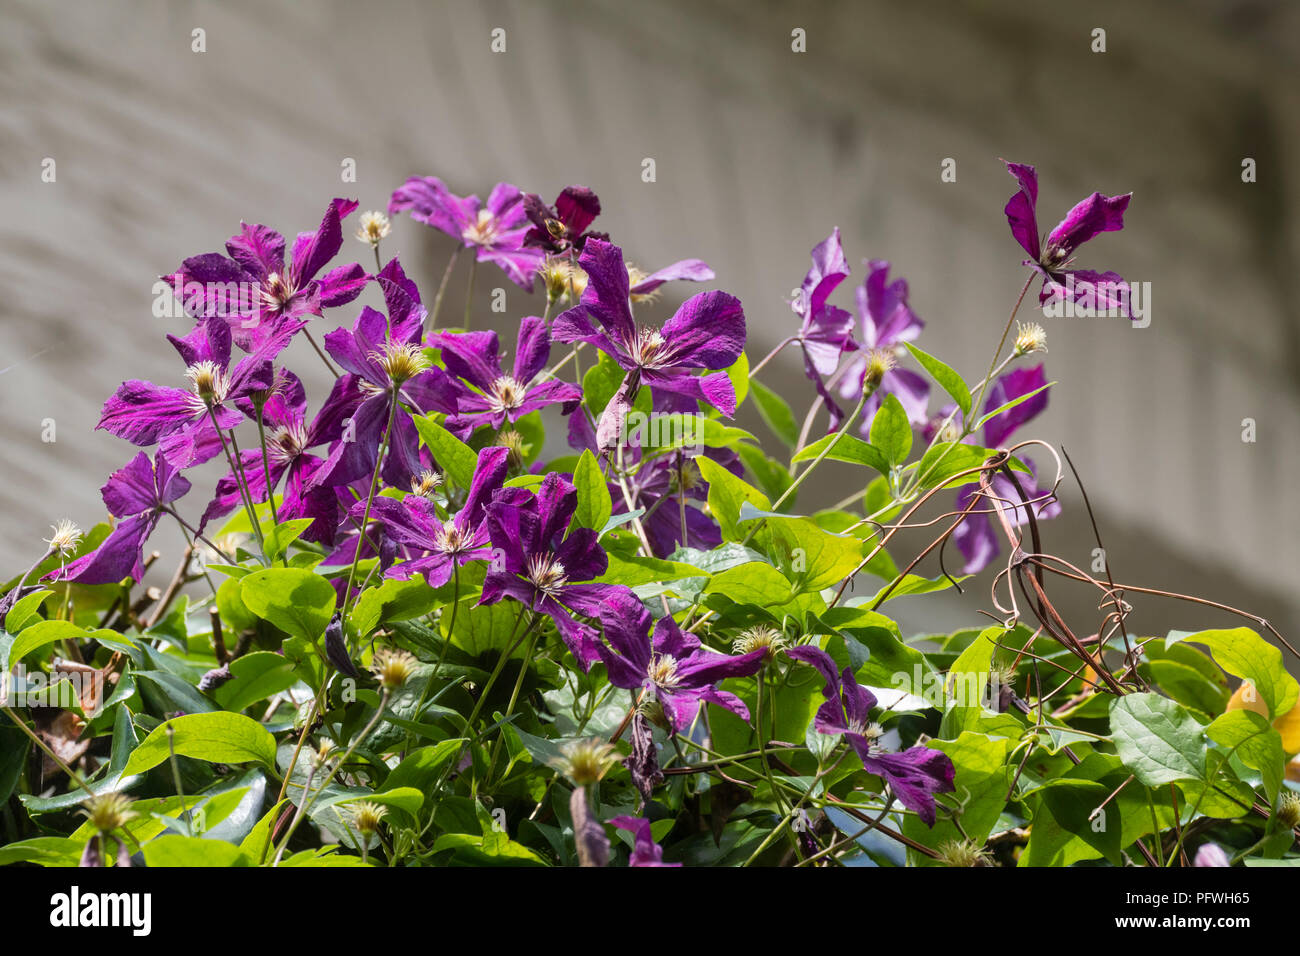 Purple flowers of the large flowered late group clematis, Clematis 'Kosmicheskaia Melodiia' Stock Photo